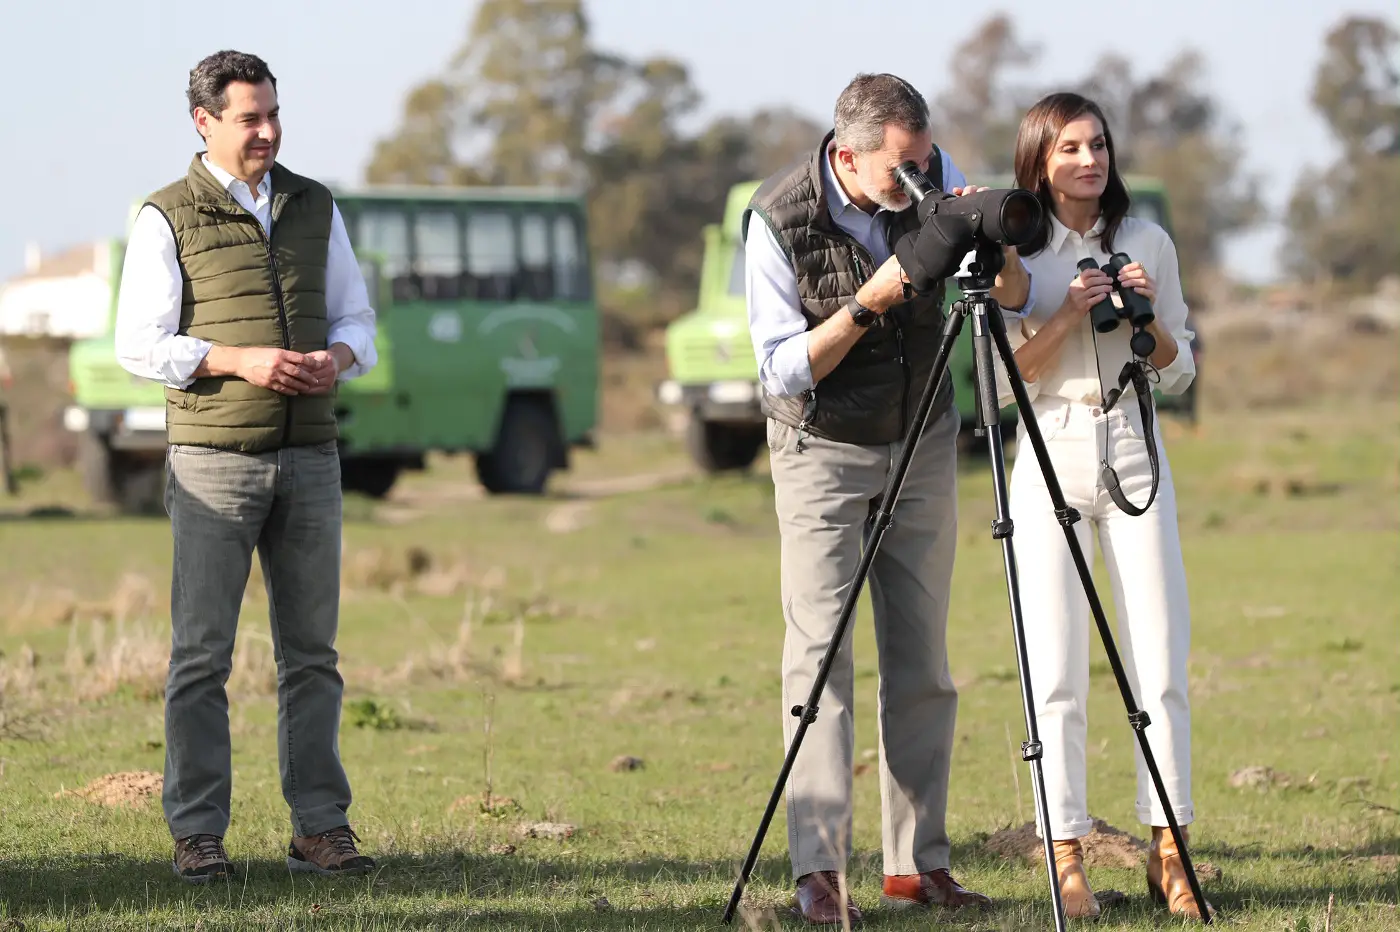 Felipe and Letizia toured the Doñana National Park, mosaic of ecosystems that house unique biodiversity in Europe.